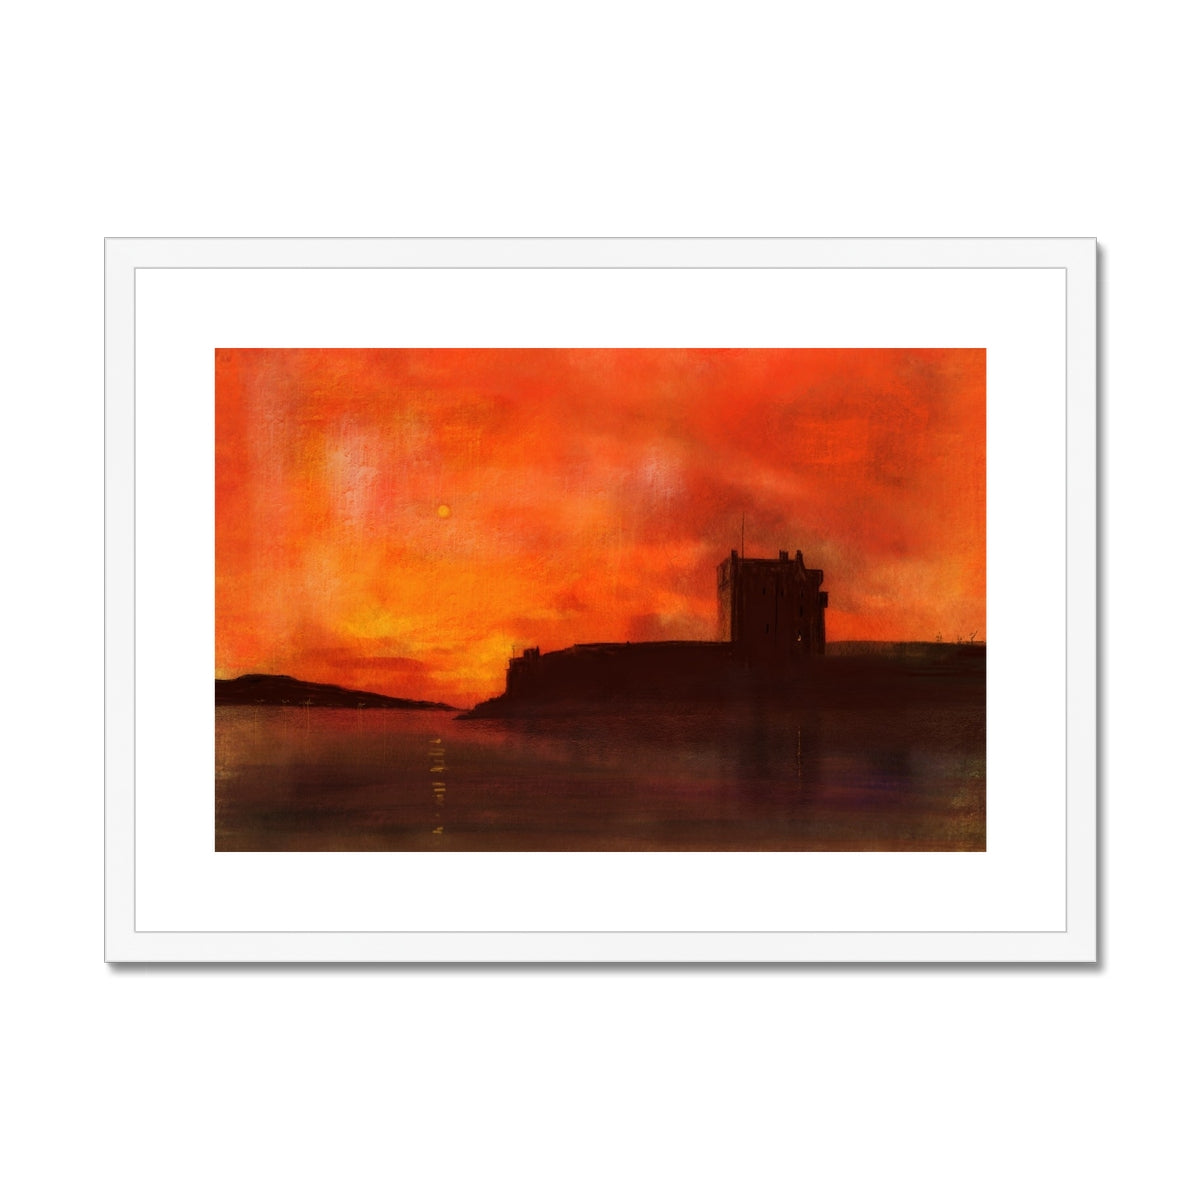 Broughty Castle Sunset Painting | Framed & Mounted Prints From Scotland-Framed & Mounted Prints-Historic & Iconic Scotland Art Gallery-A2 Landscape-White Frame-Paintings, Prints, Homeware, Art Gifts From Scotland By Scottish Artist Kevin Hunter